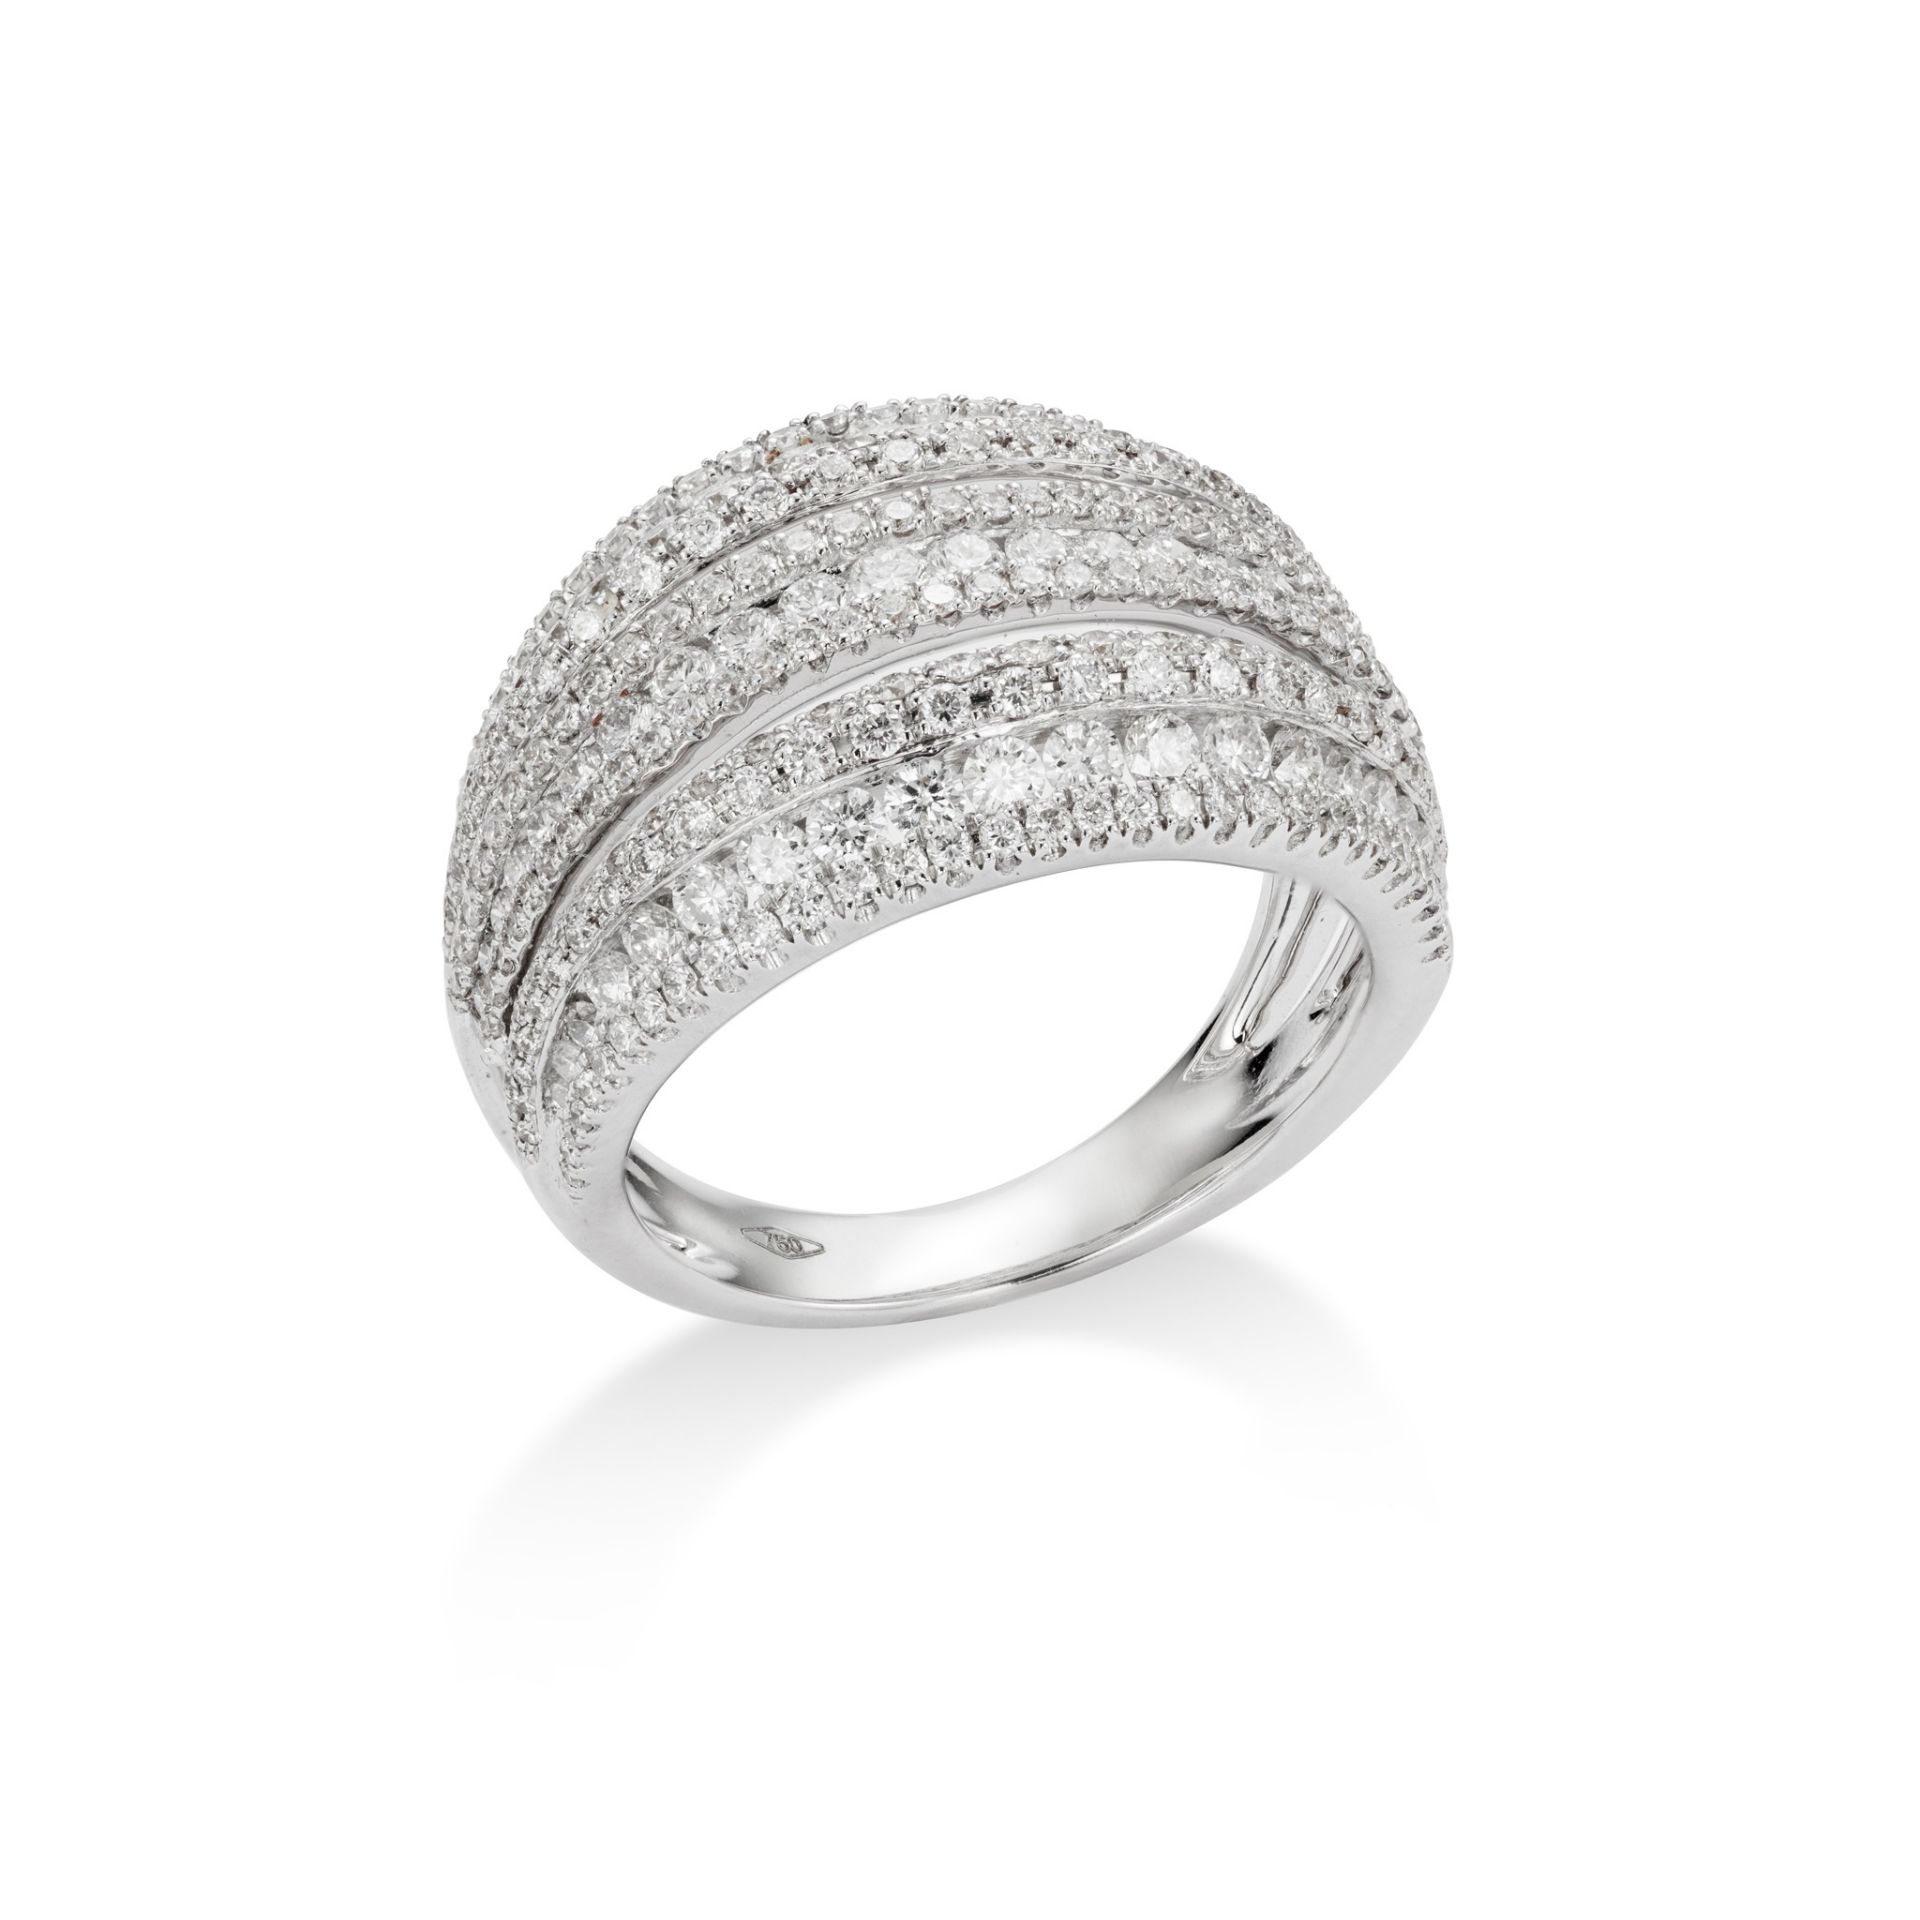 A diamond dress ring Channel-set with three rows of brilliant-cut diamonds between pavé-set